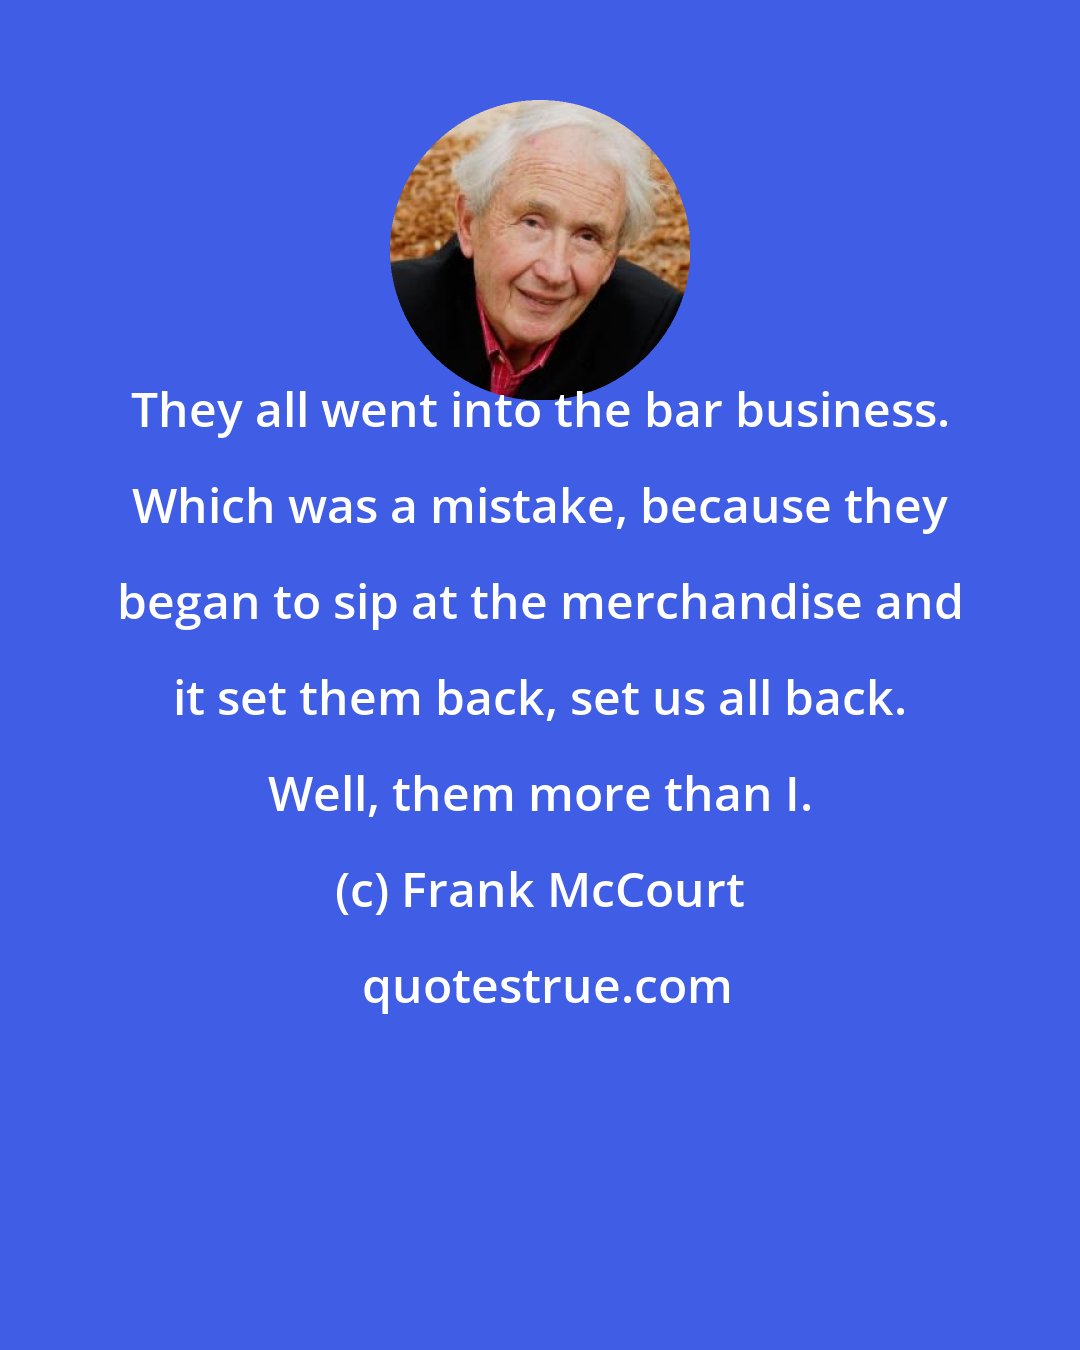 Frank McCourt: They all went into the bar business. Which was a mistake, because they began to sip at the merchandise and it set them back, set us all back. Well, them more than I.